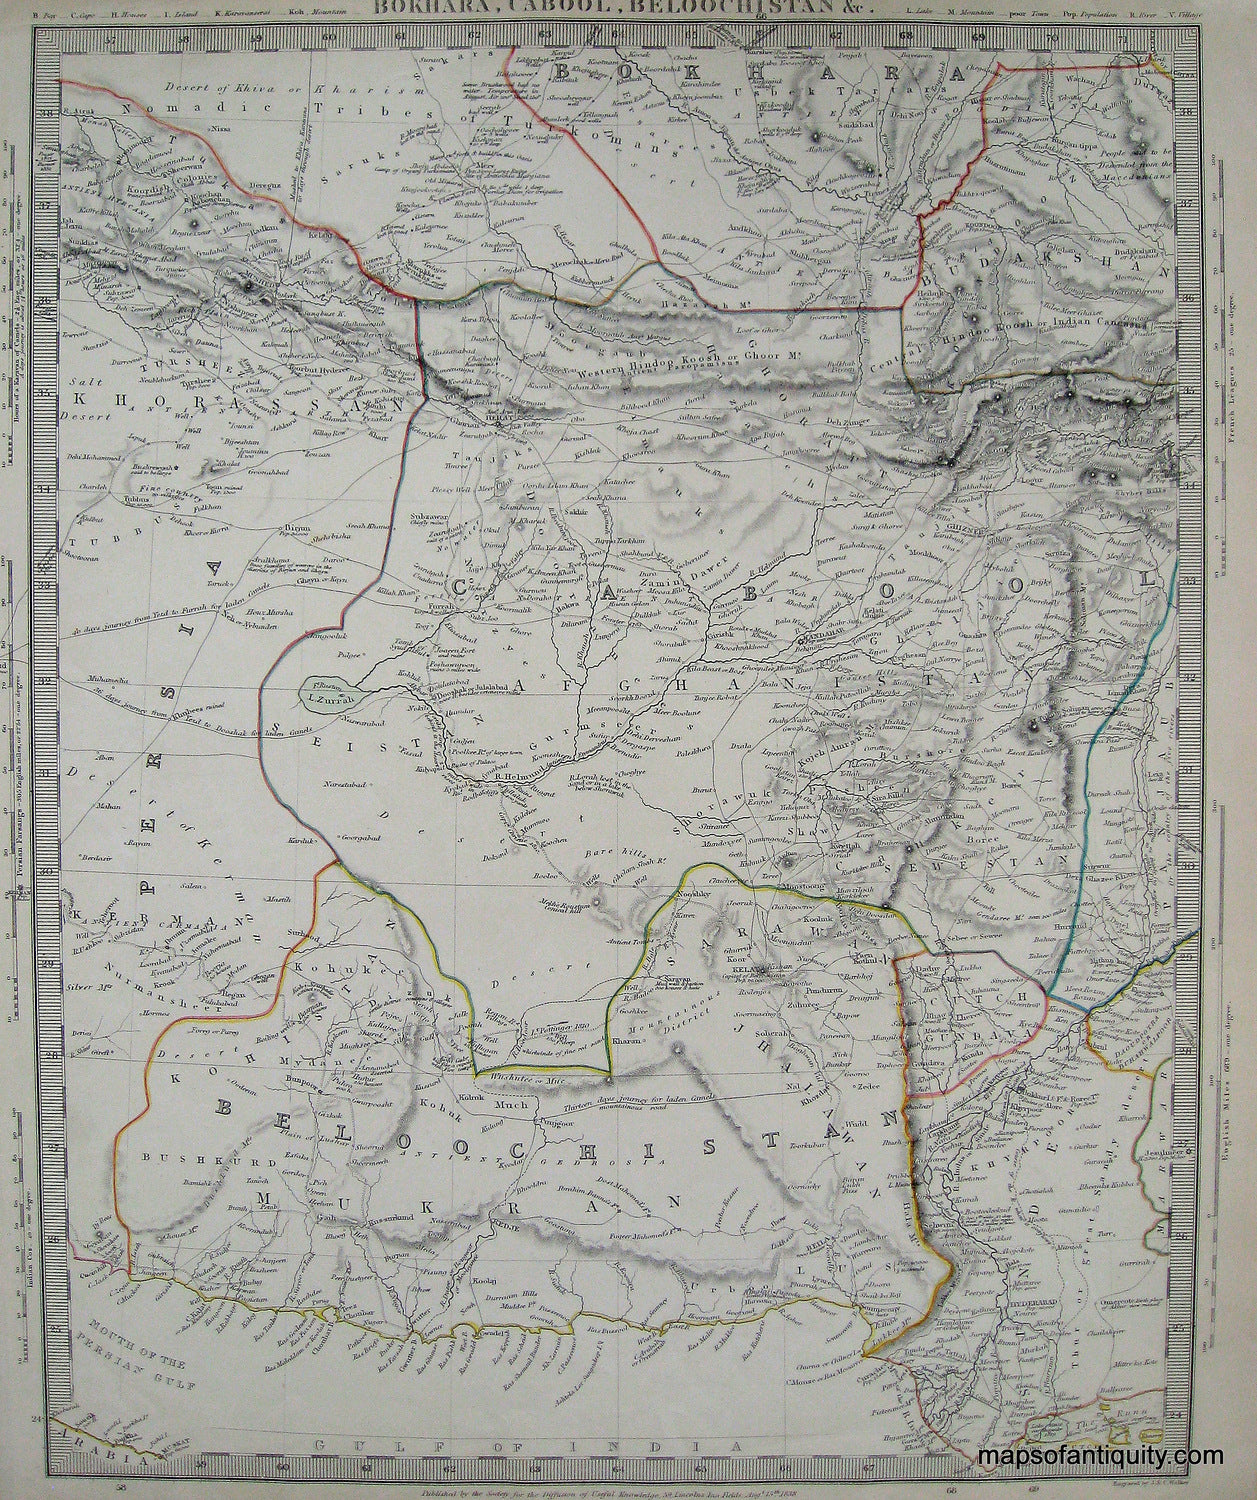 Antique-Hand-Colored-Map-Bokhara-Cabool-Beloochistan-Middle-East-and-Holy-Land--1838-SDUK/-Society-for-the-Diffusion-of-Useful-Knowledge-Maps-Of-Antiquity